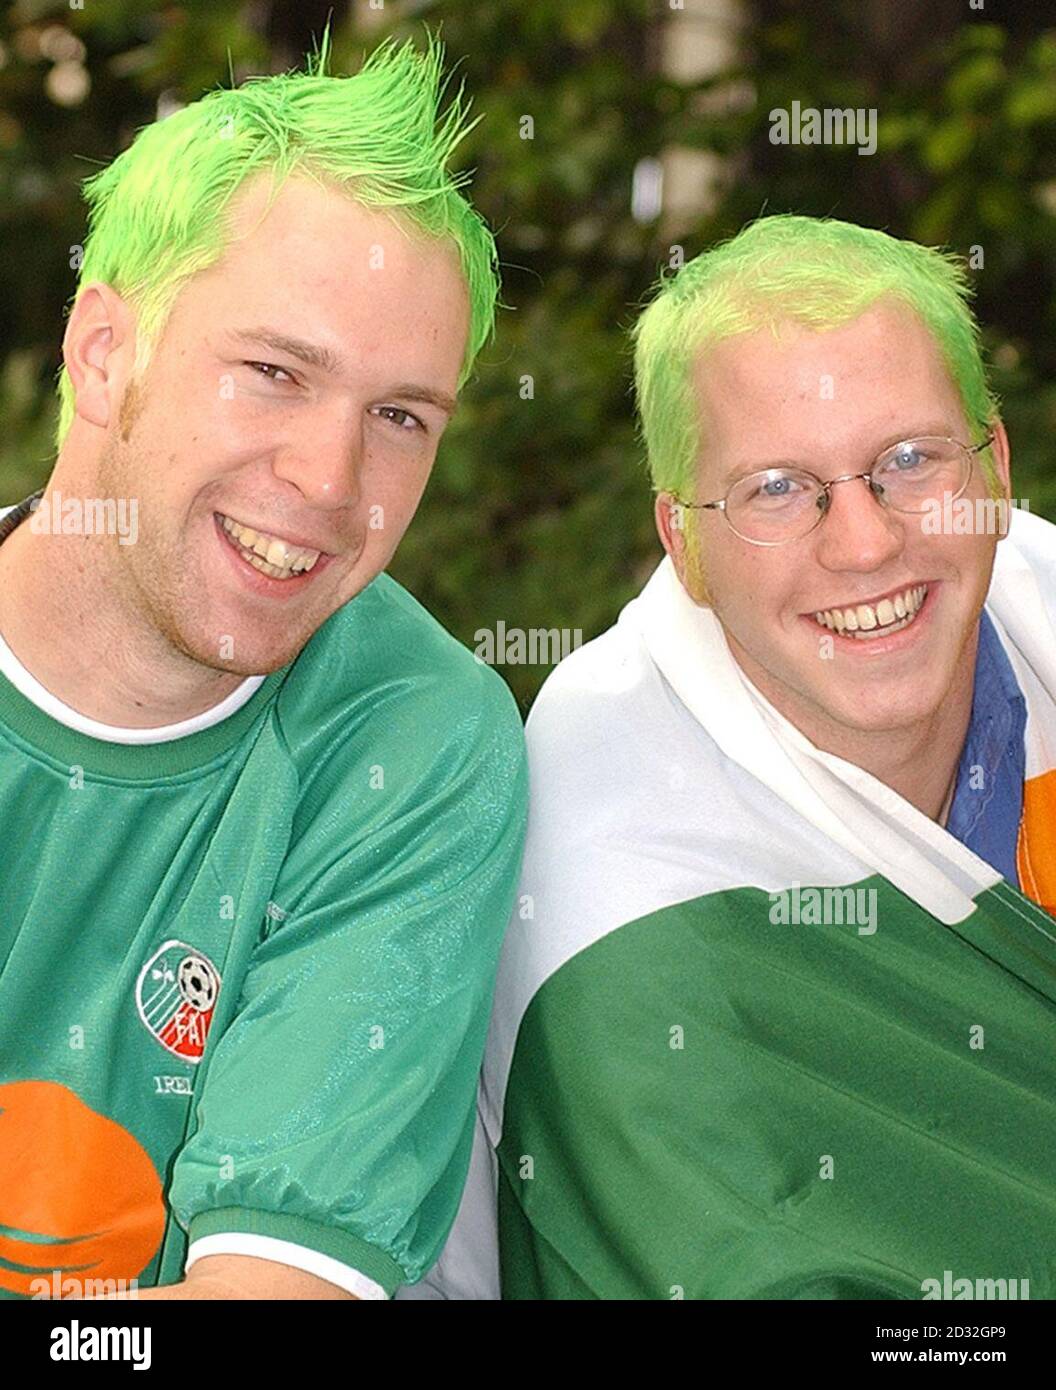 Ireland fans Hugh Cantwell , 36, (left) from Coalbrook City in Co. Tipperary, and Brendon Jackson, 23,  from Kilternan in Co. Dublin, who were stopped and questioned at the airport when they arrived Thursday in Niigata, Japan, because they had green hair.    * They are in Japan ahead of Saturday's World Cup game between Ireland and Cameroon which takes place in Niigata. Stock Photo